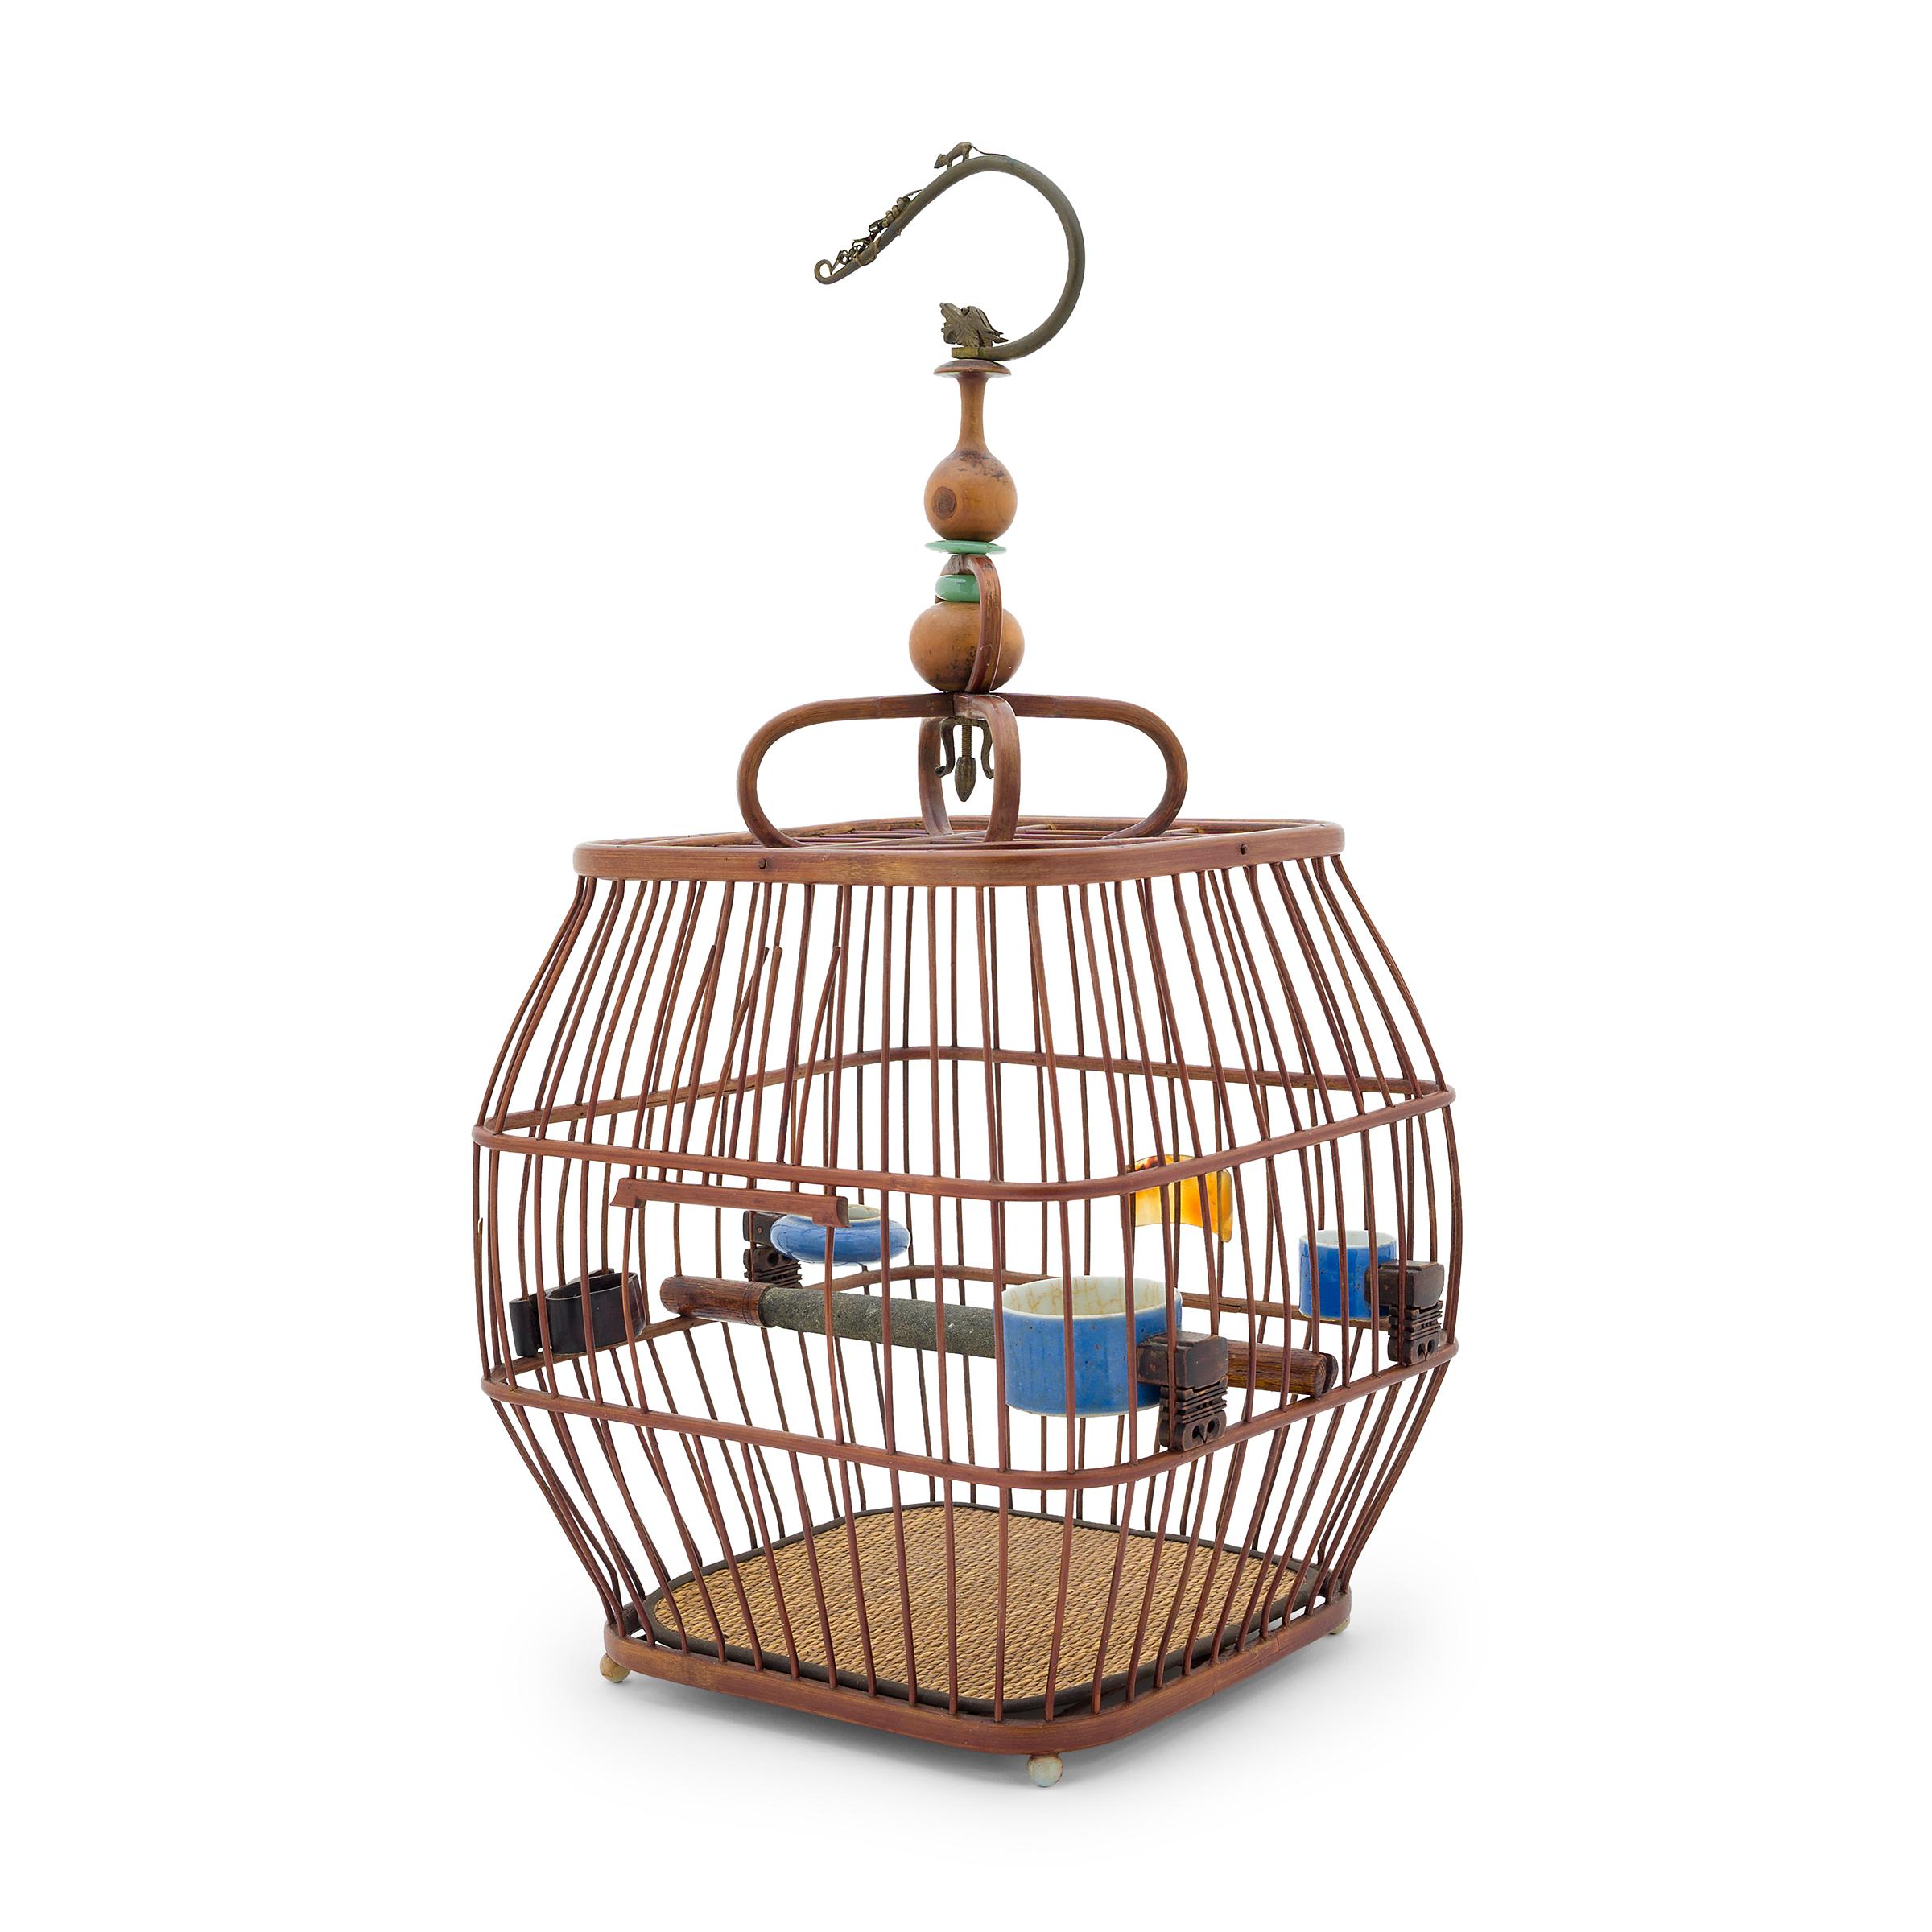 This charming, barrel-form birdcage was once home to the pet songbird of a Qing-dynasty aristocrat. Bird-keeping was a popular pastime throughout the Qing dynasty and inspired its own material culture of beautiful cages and fine accessories. Dated